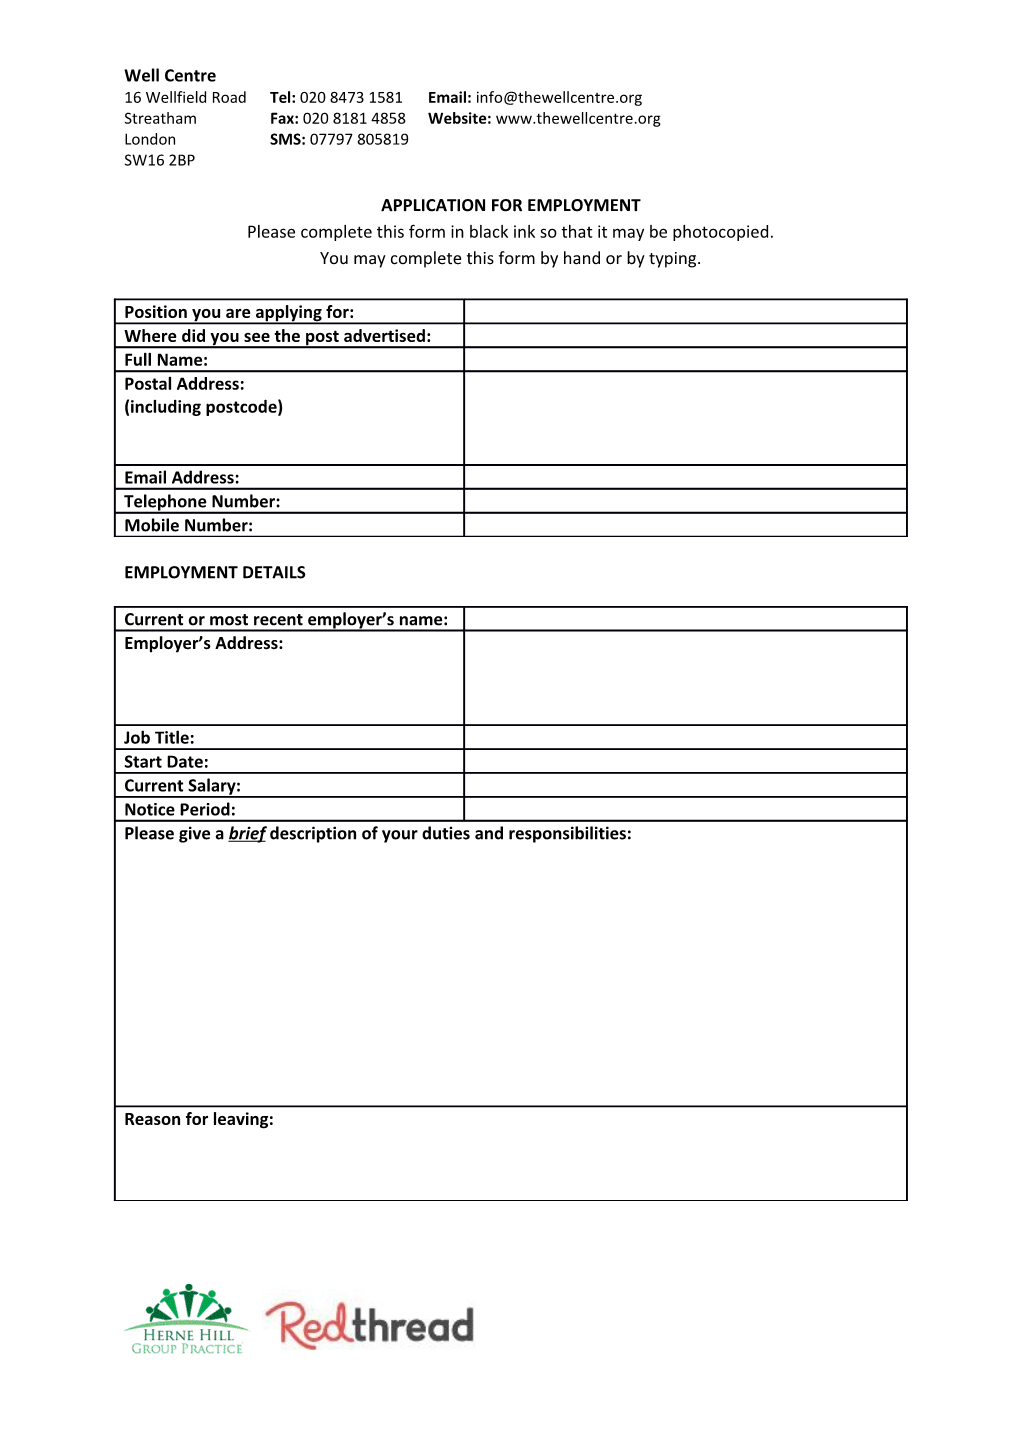 Please Complete This Form in Black Ink So That It May Be Photocopied